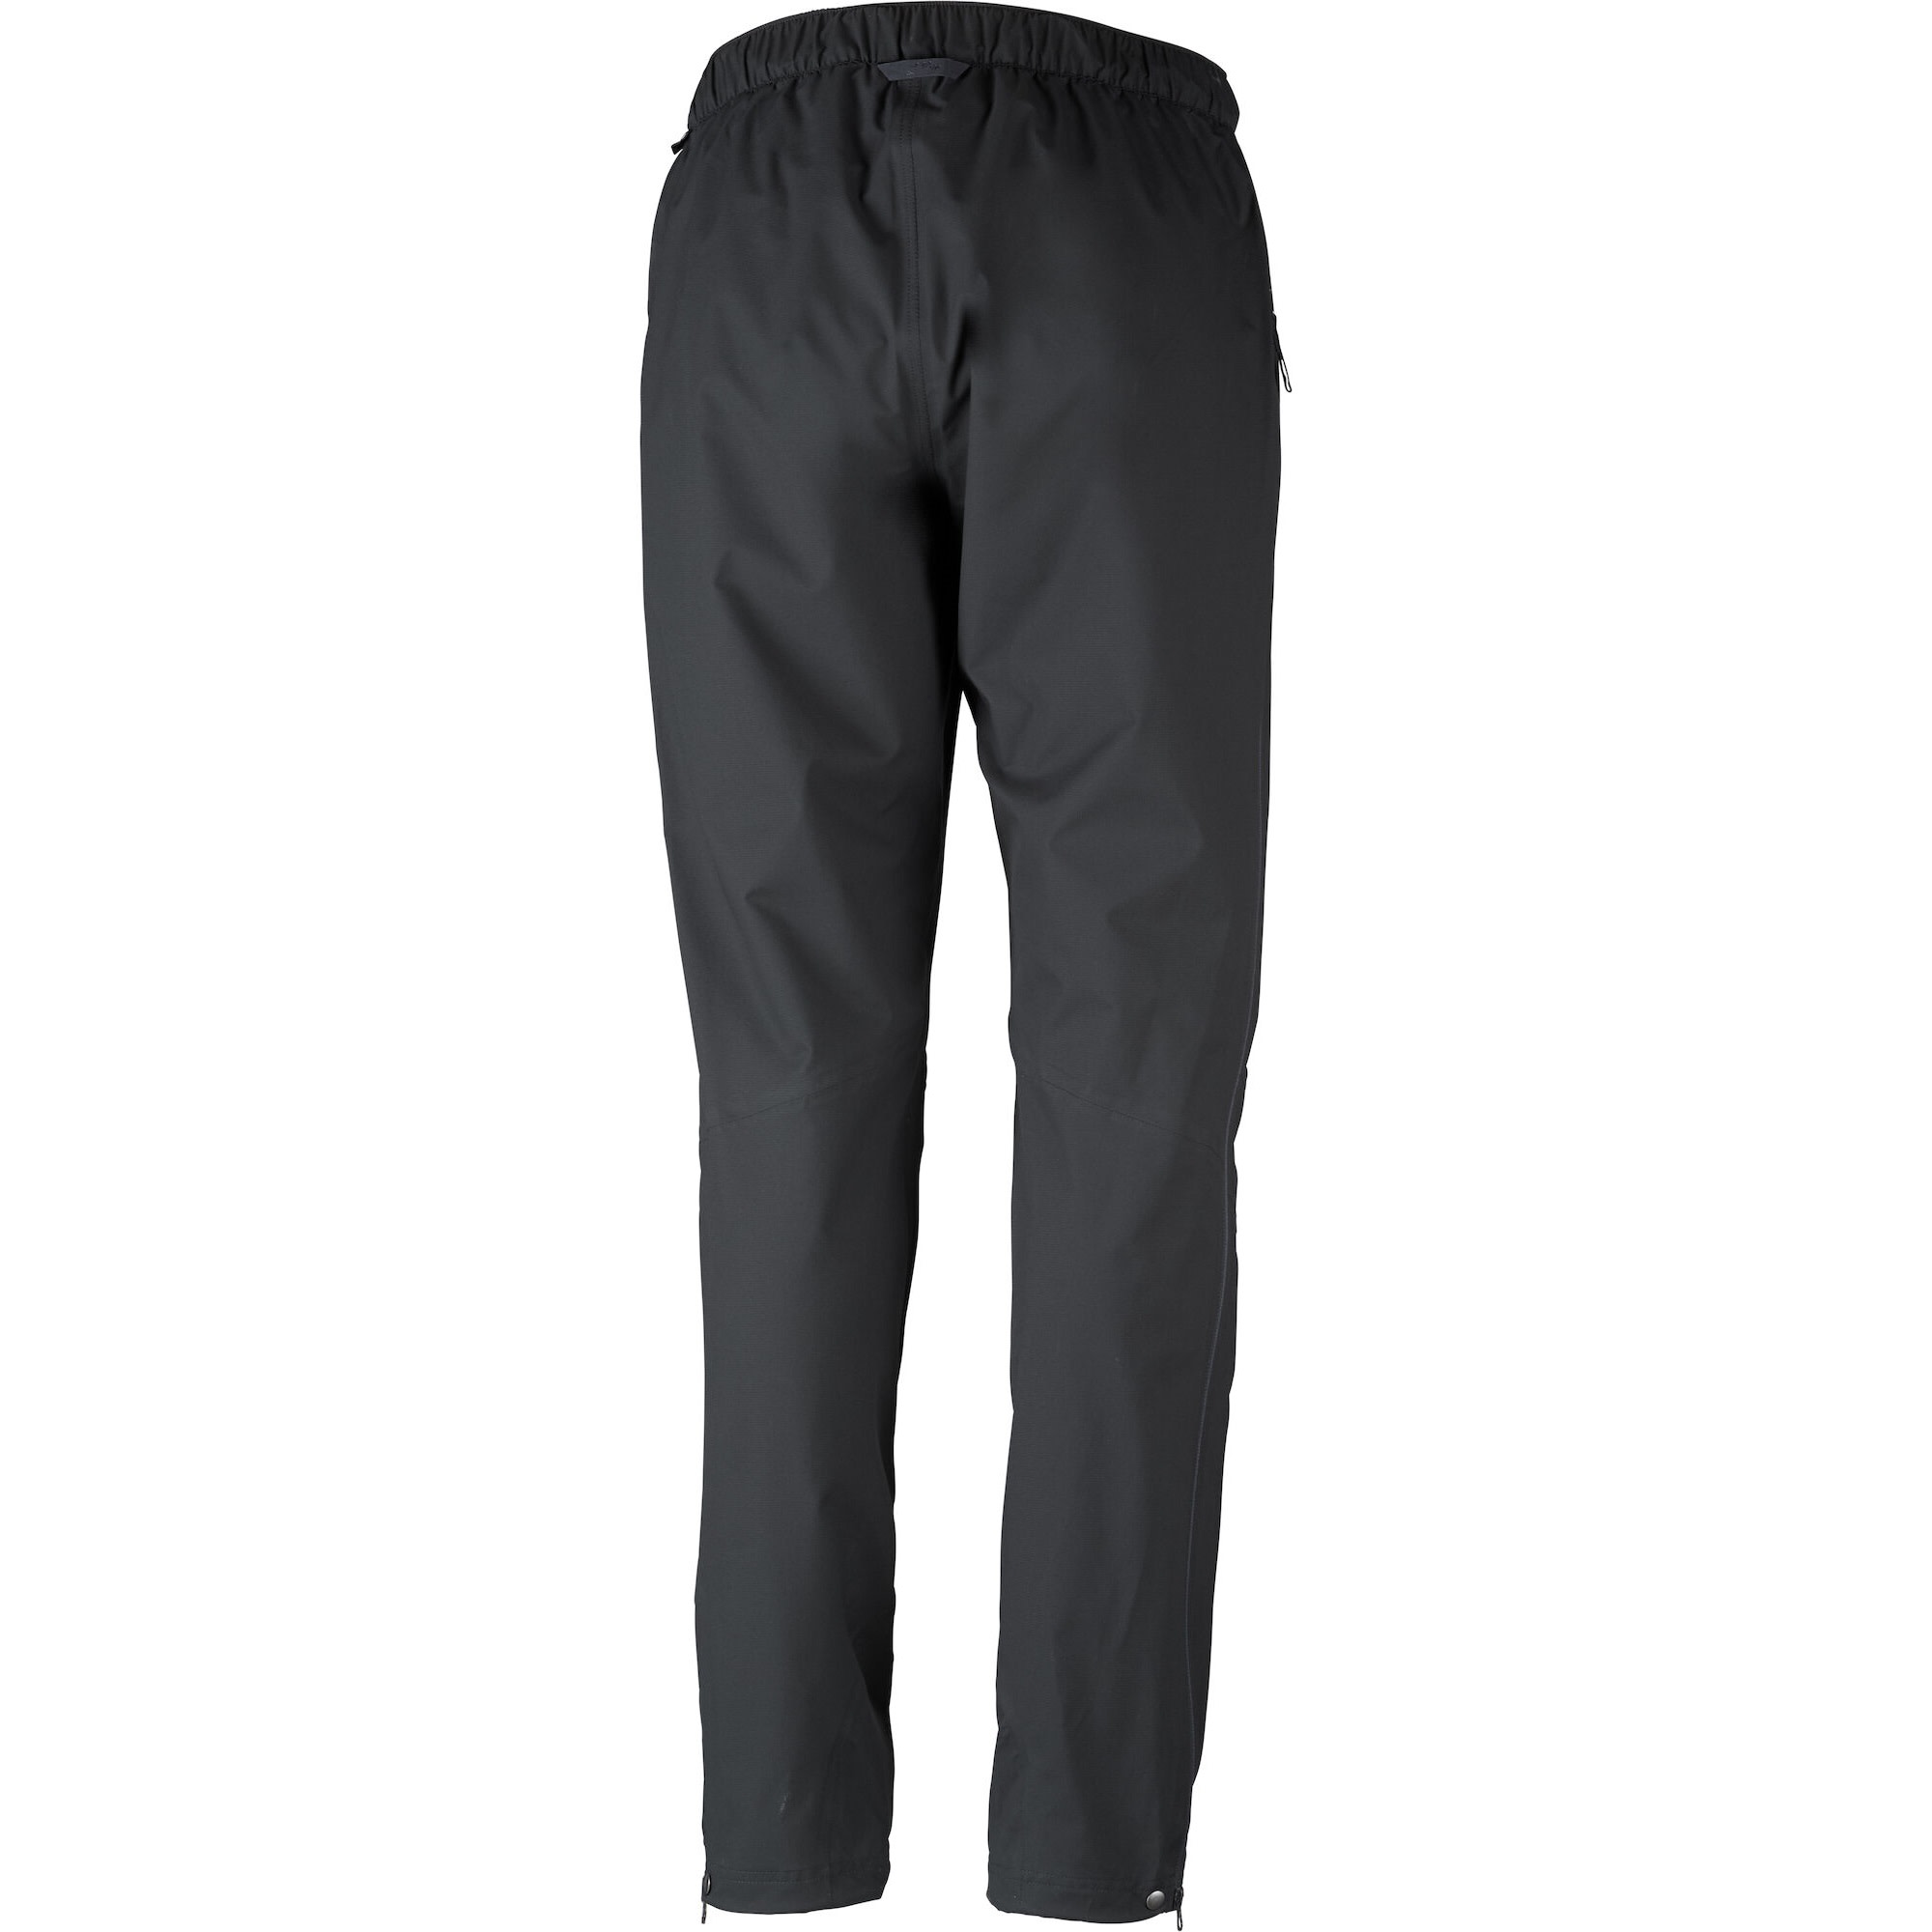 Lundhags Lo Women’s Pant Charcoal